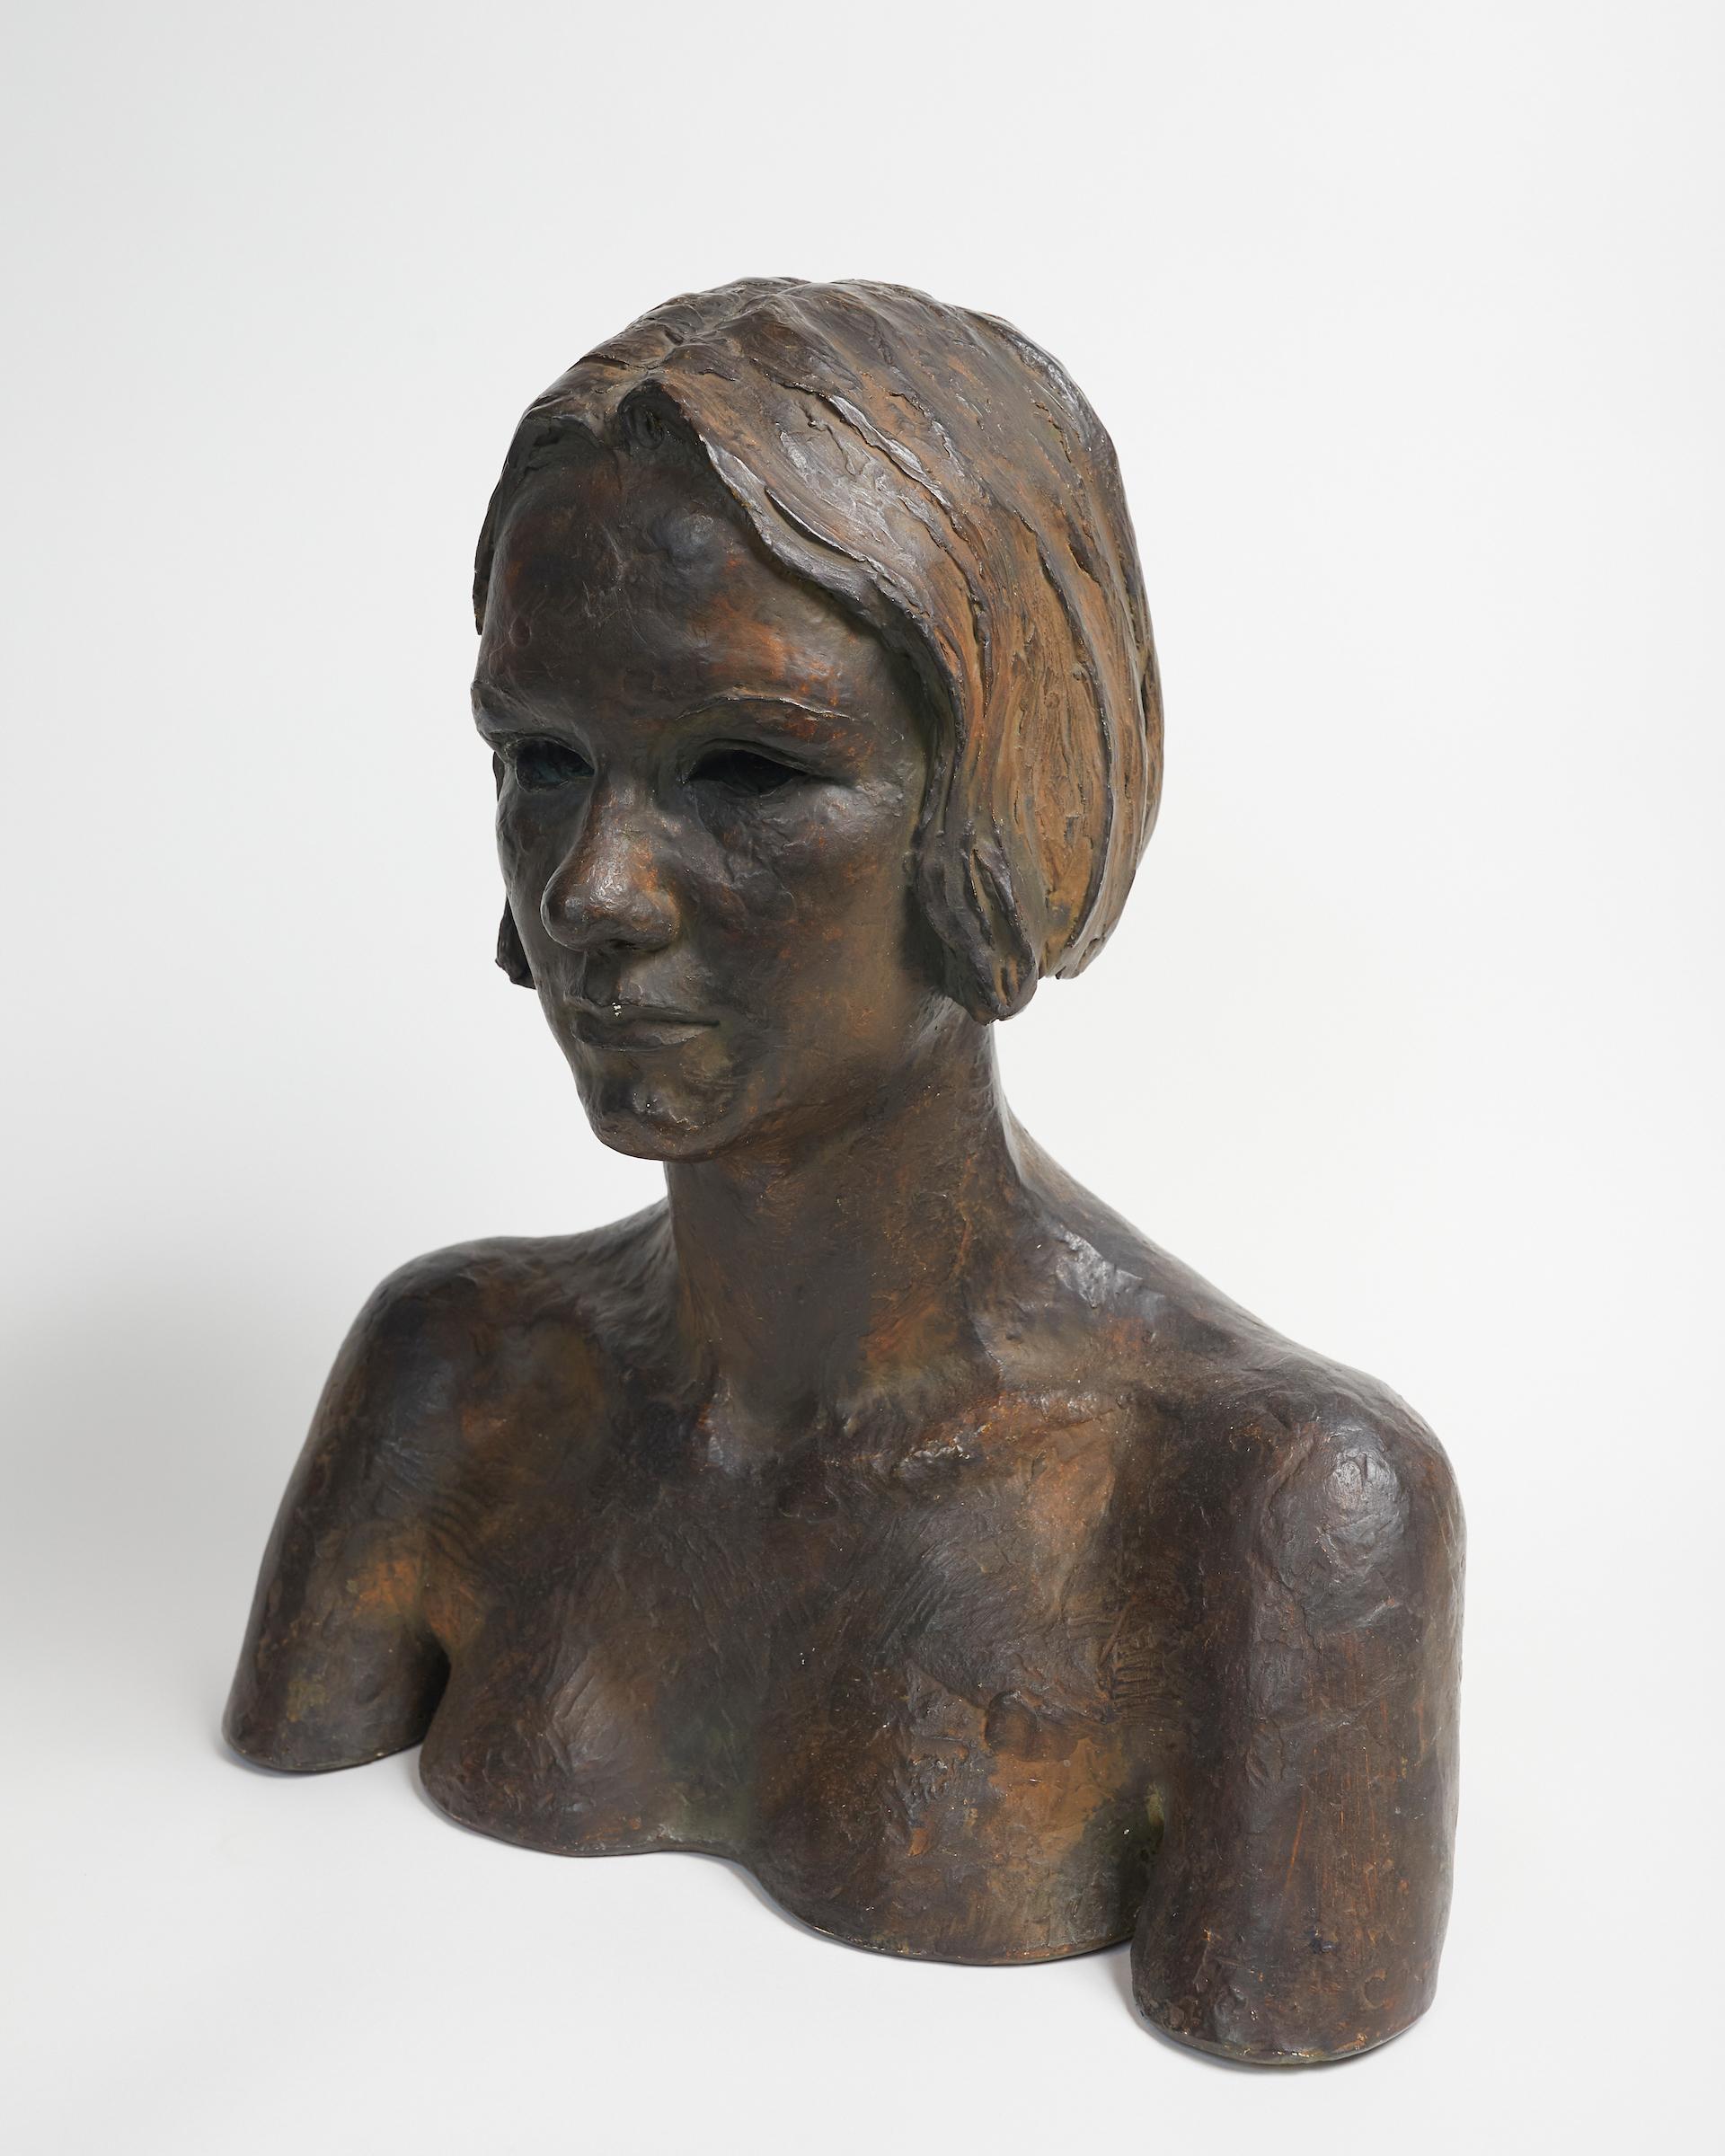 Patinated Plaster Bust of woman by Herbert McRae Miller Signed: H. Mcrae Miller/32
Herbert McRae-Miller was born in Montreal. He studied at the Art Students League, New York under John Sloan; at the Monument National, Montreal under Edmund Dyonnet;